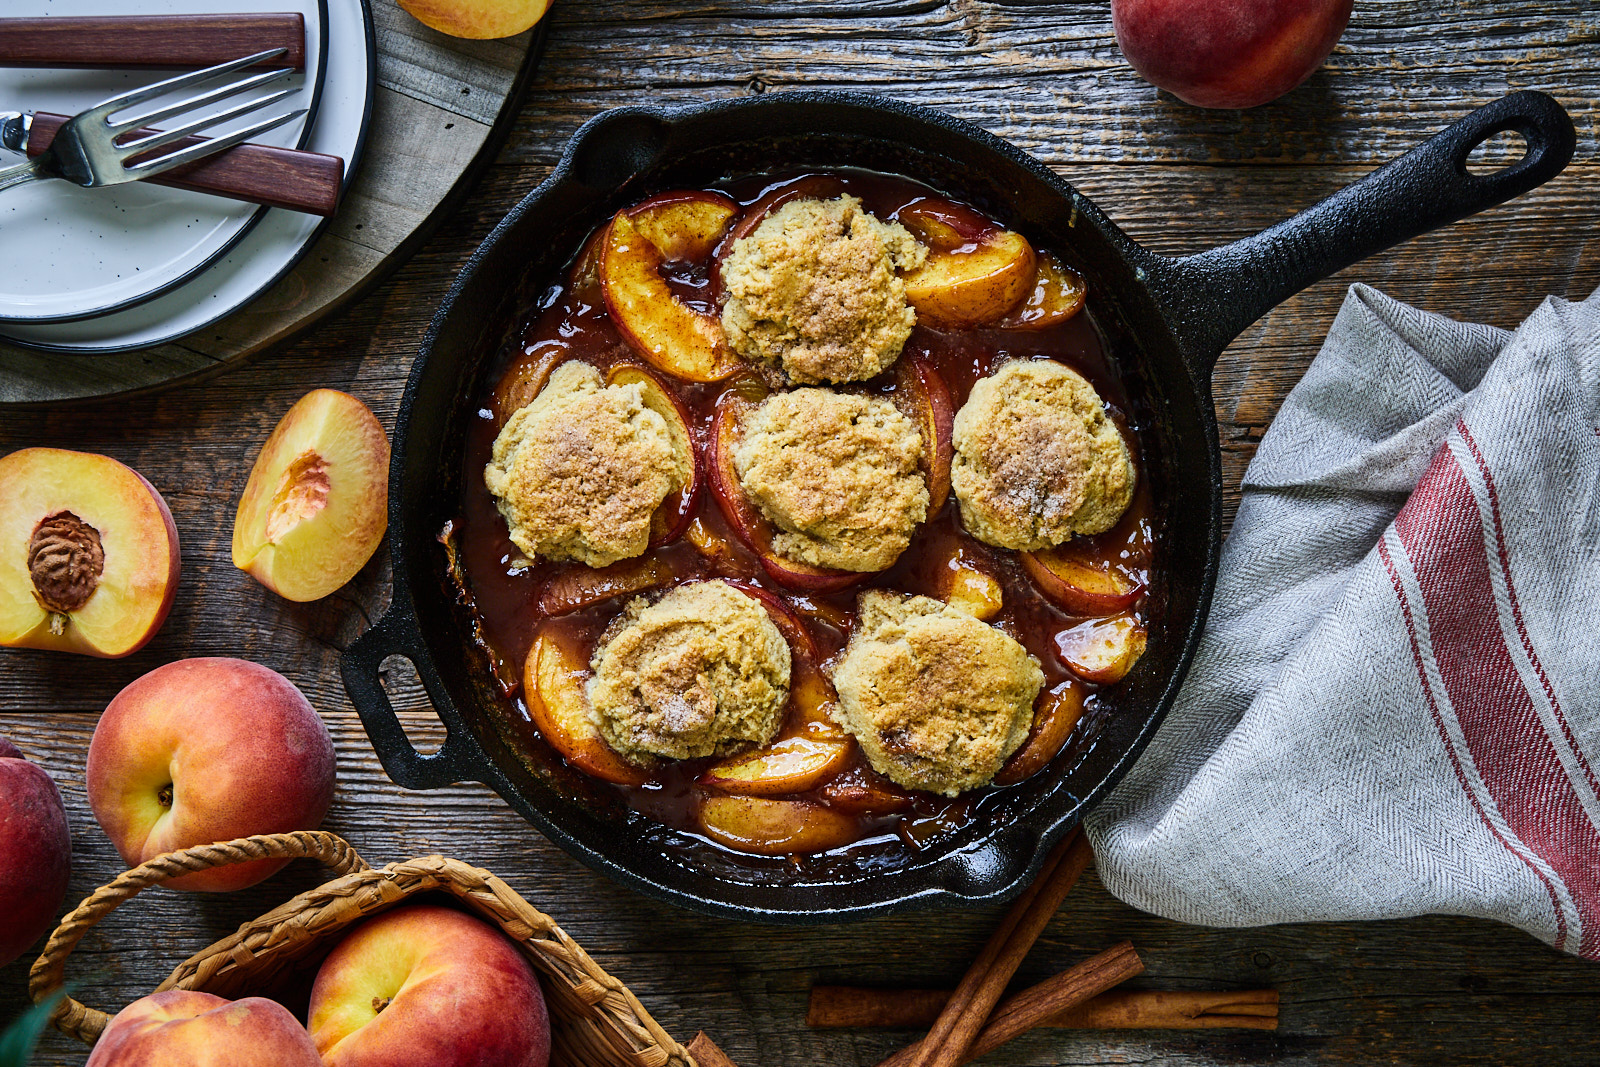 Grilled skillet peach cobbler with almond flour biscuit topping